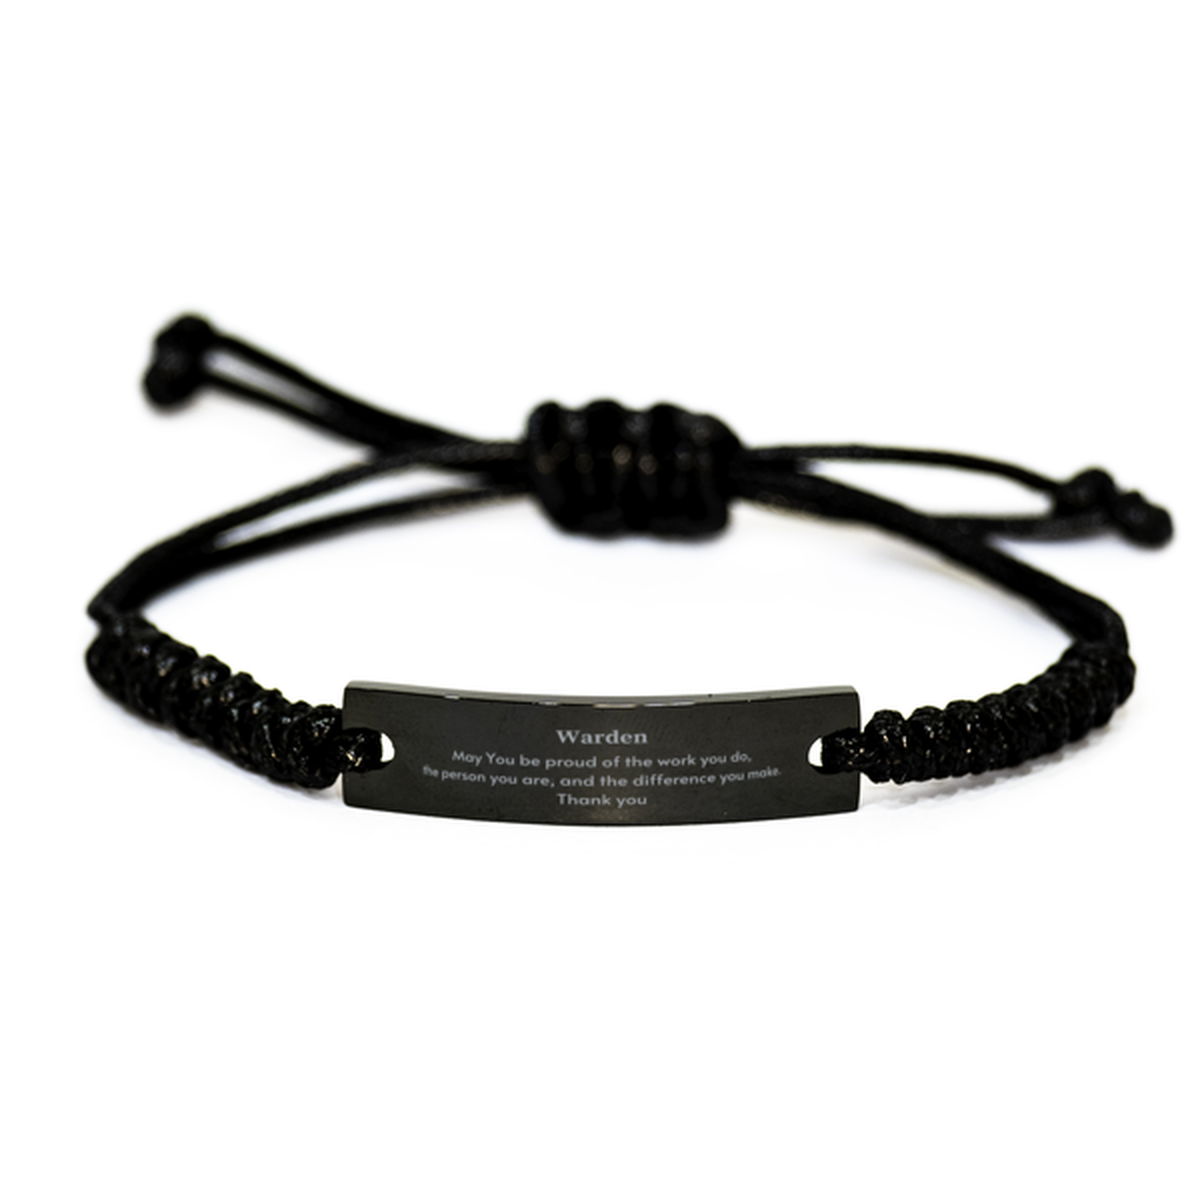 Heartwarming Black Rope Bracelet Retirement Coworkers Gifts for Warden, Warden May You be proud of the work you do, the person you are Gifts for Boss Men Women Friends